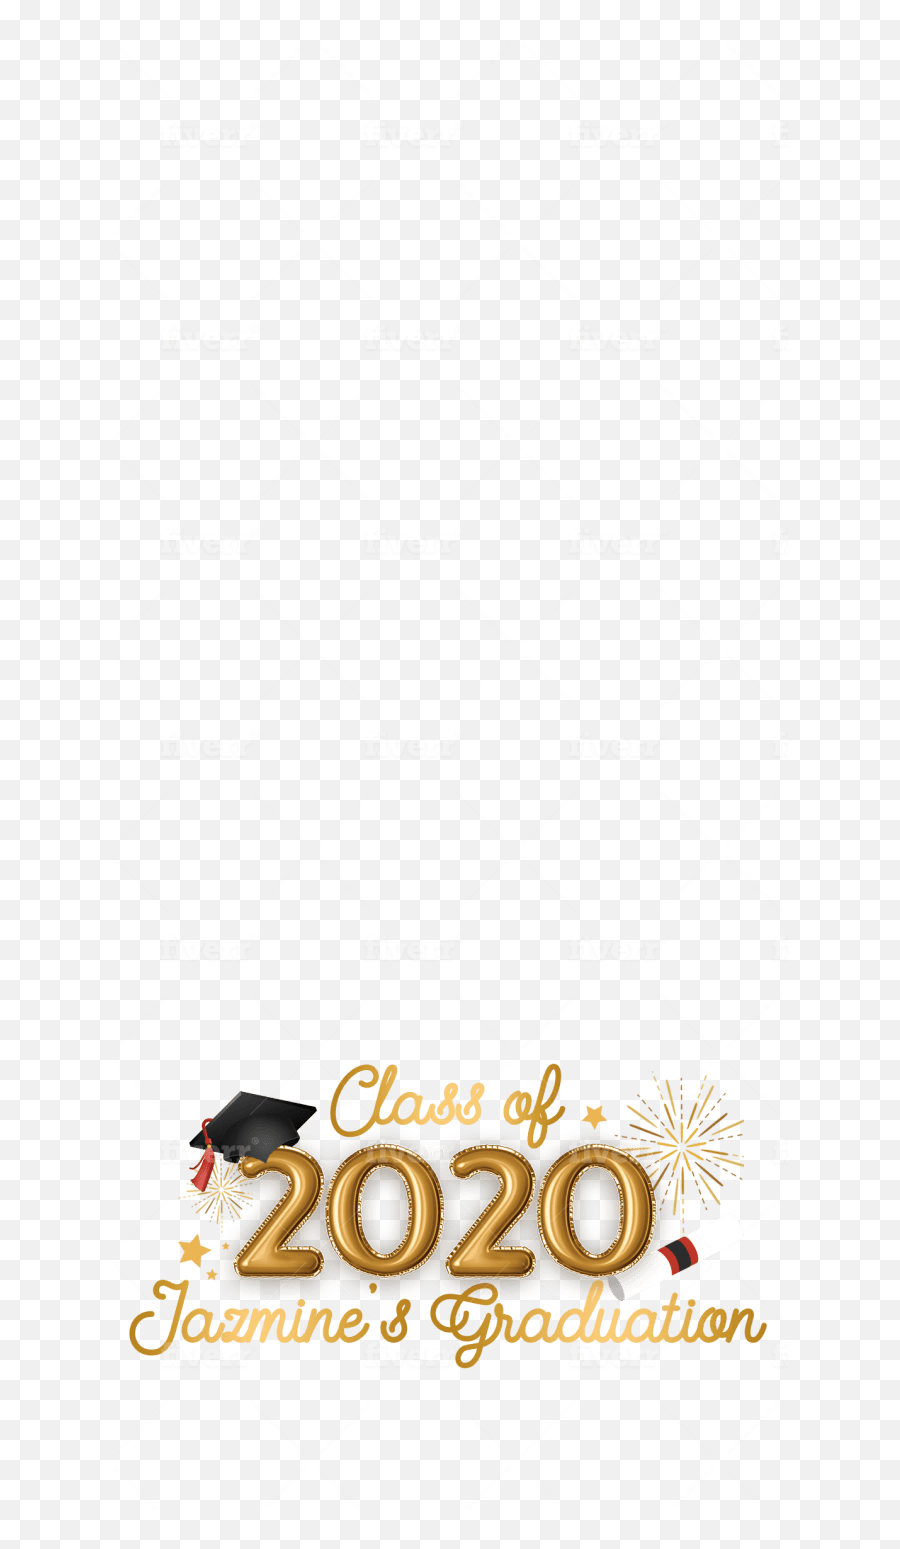 I Will Design Great Snapchat Filter And Geofilter Snapchat Emoji,Snapchat Filter Png